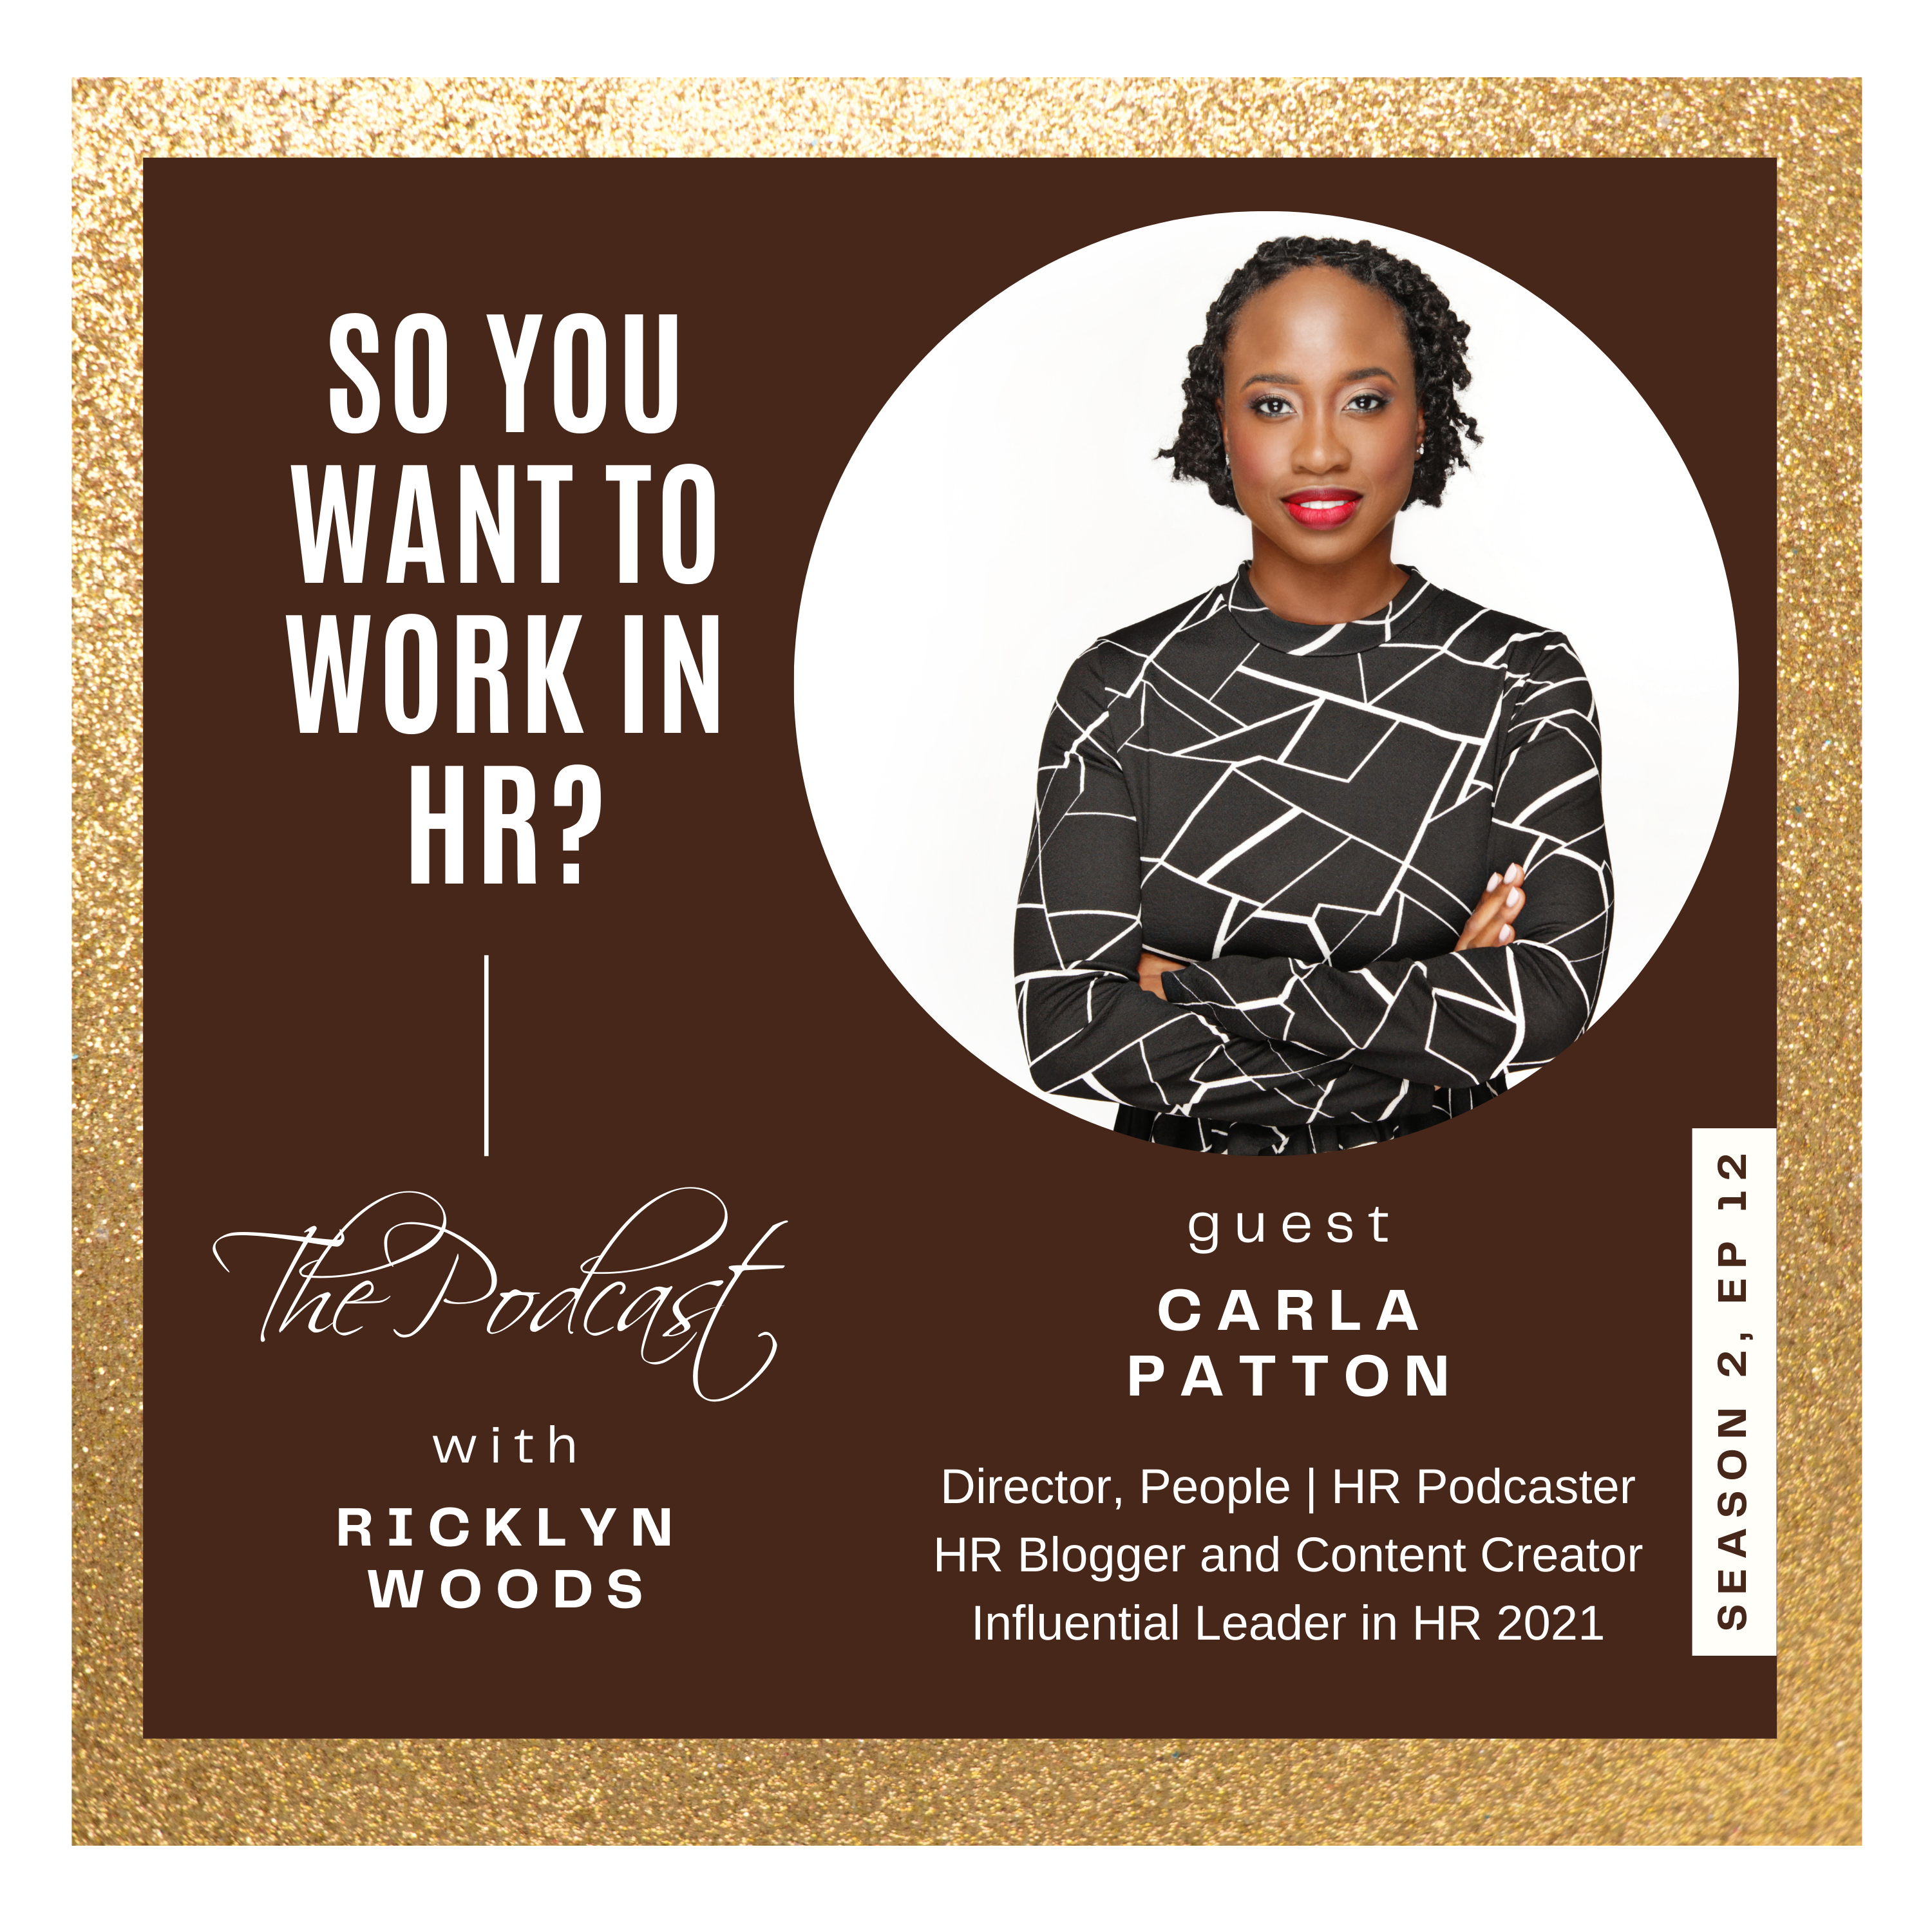 Brown Square with Gold Frame with So You Want to Work in HR? the Podcast with Ricklyn Woods Logo featuring Carla Patton with her headshot in a circle.